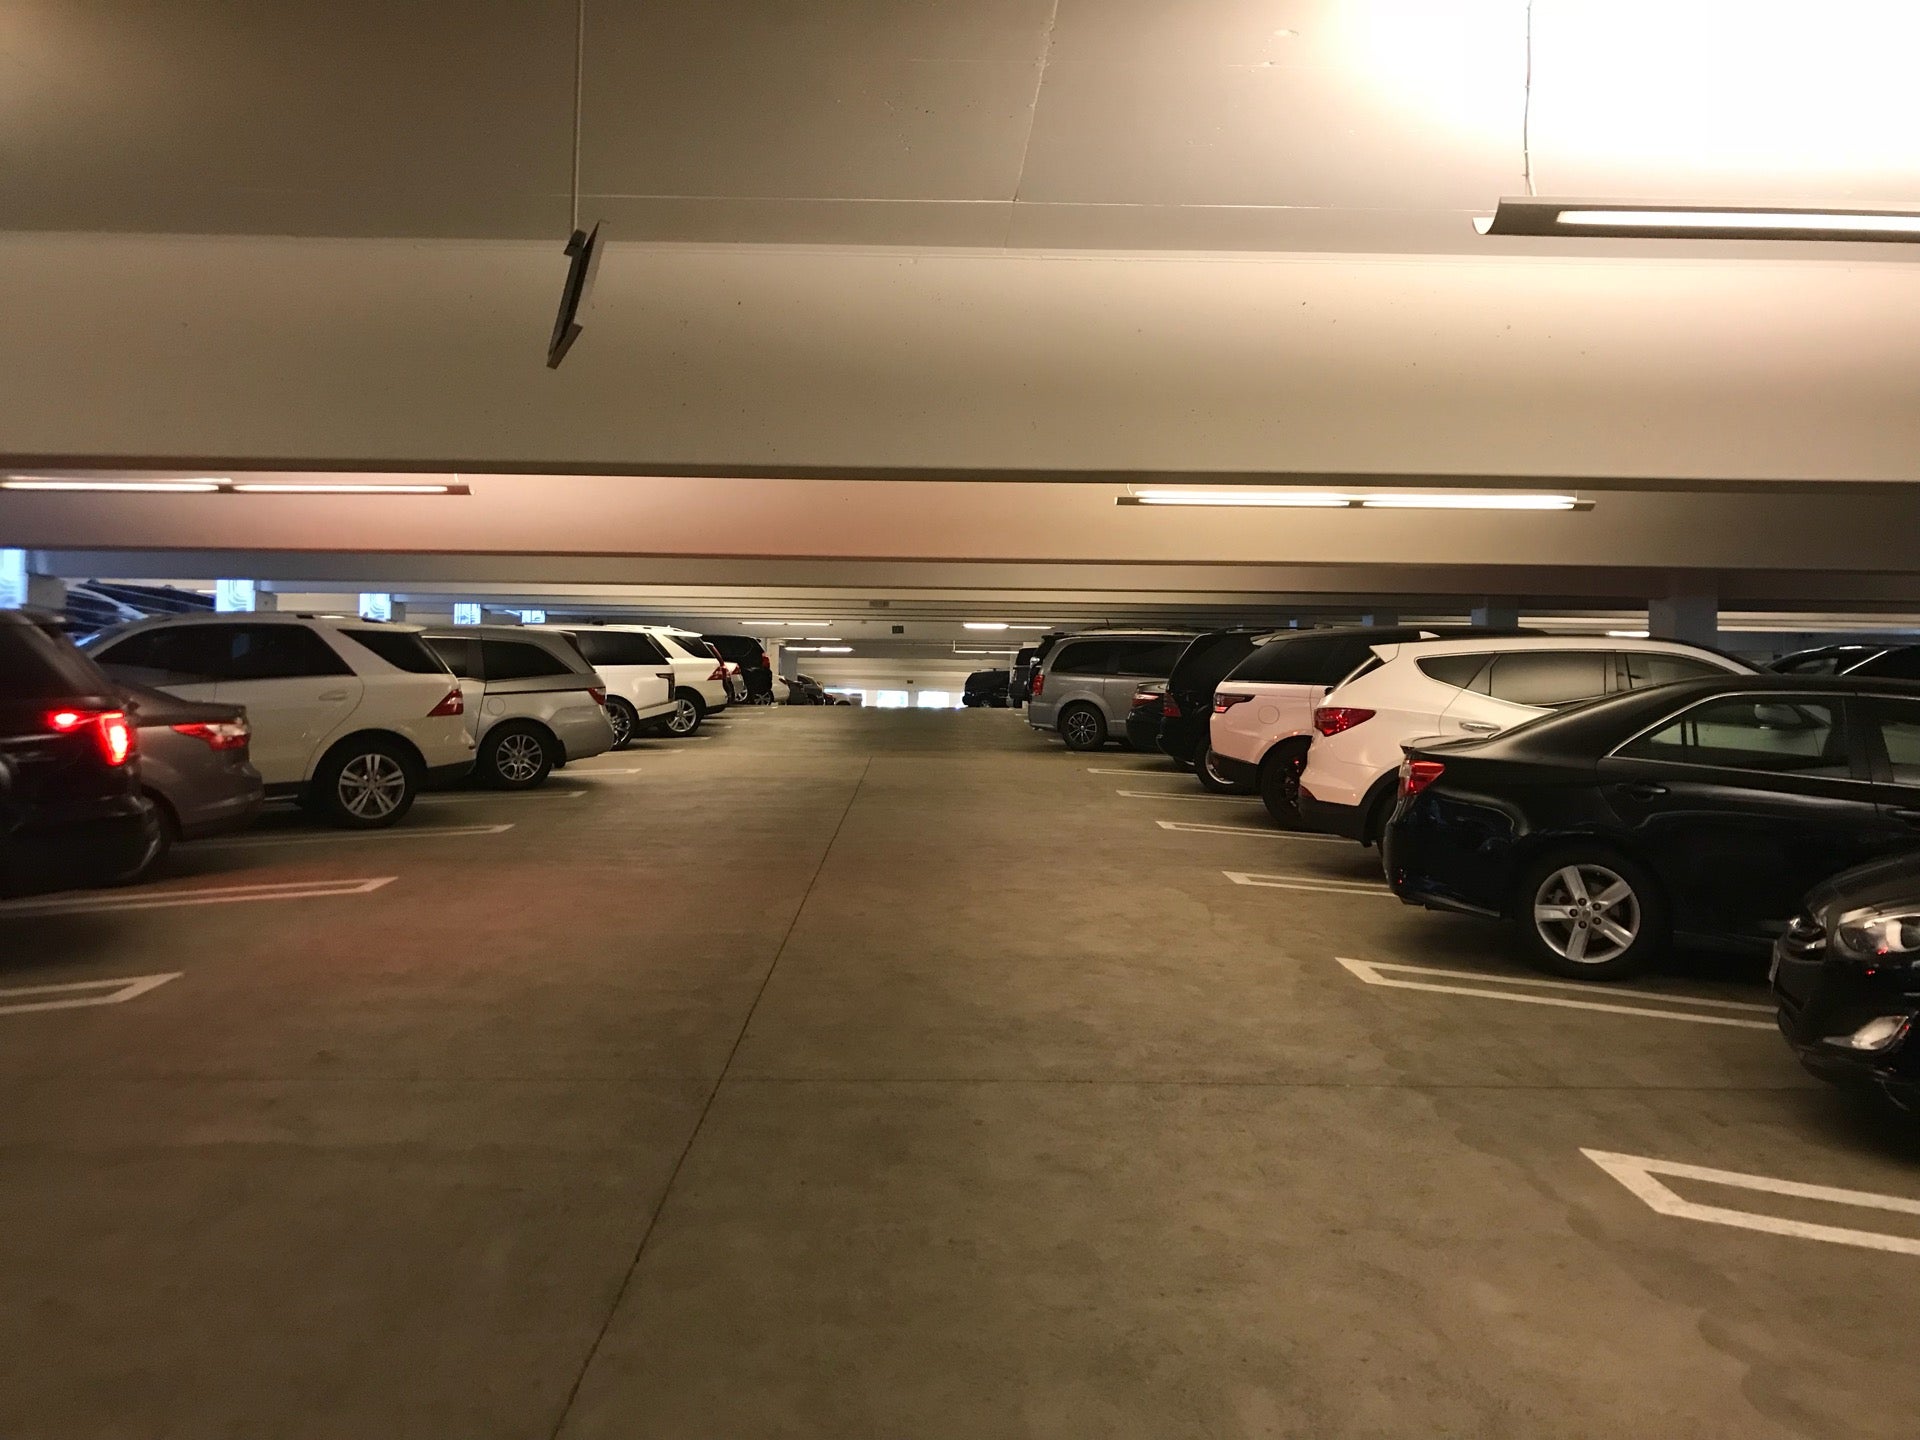 Fashion Island Parking Structure #4 - IPD : IPD